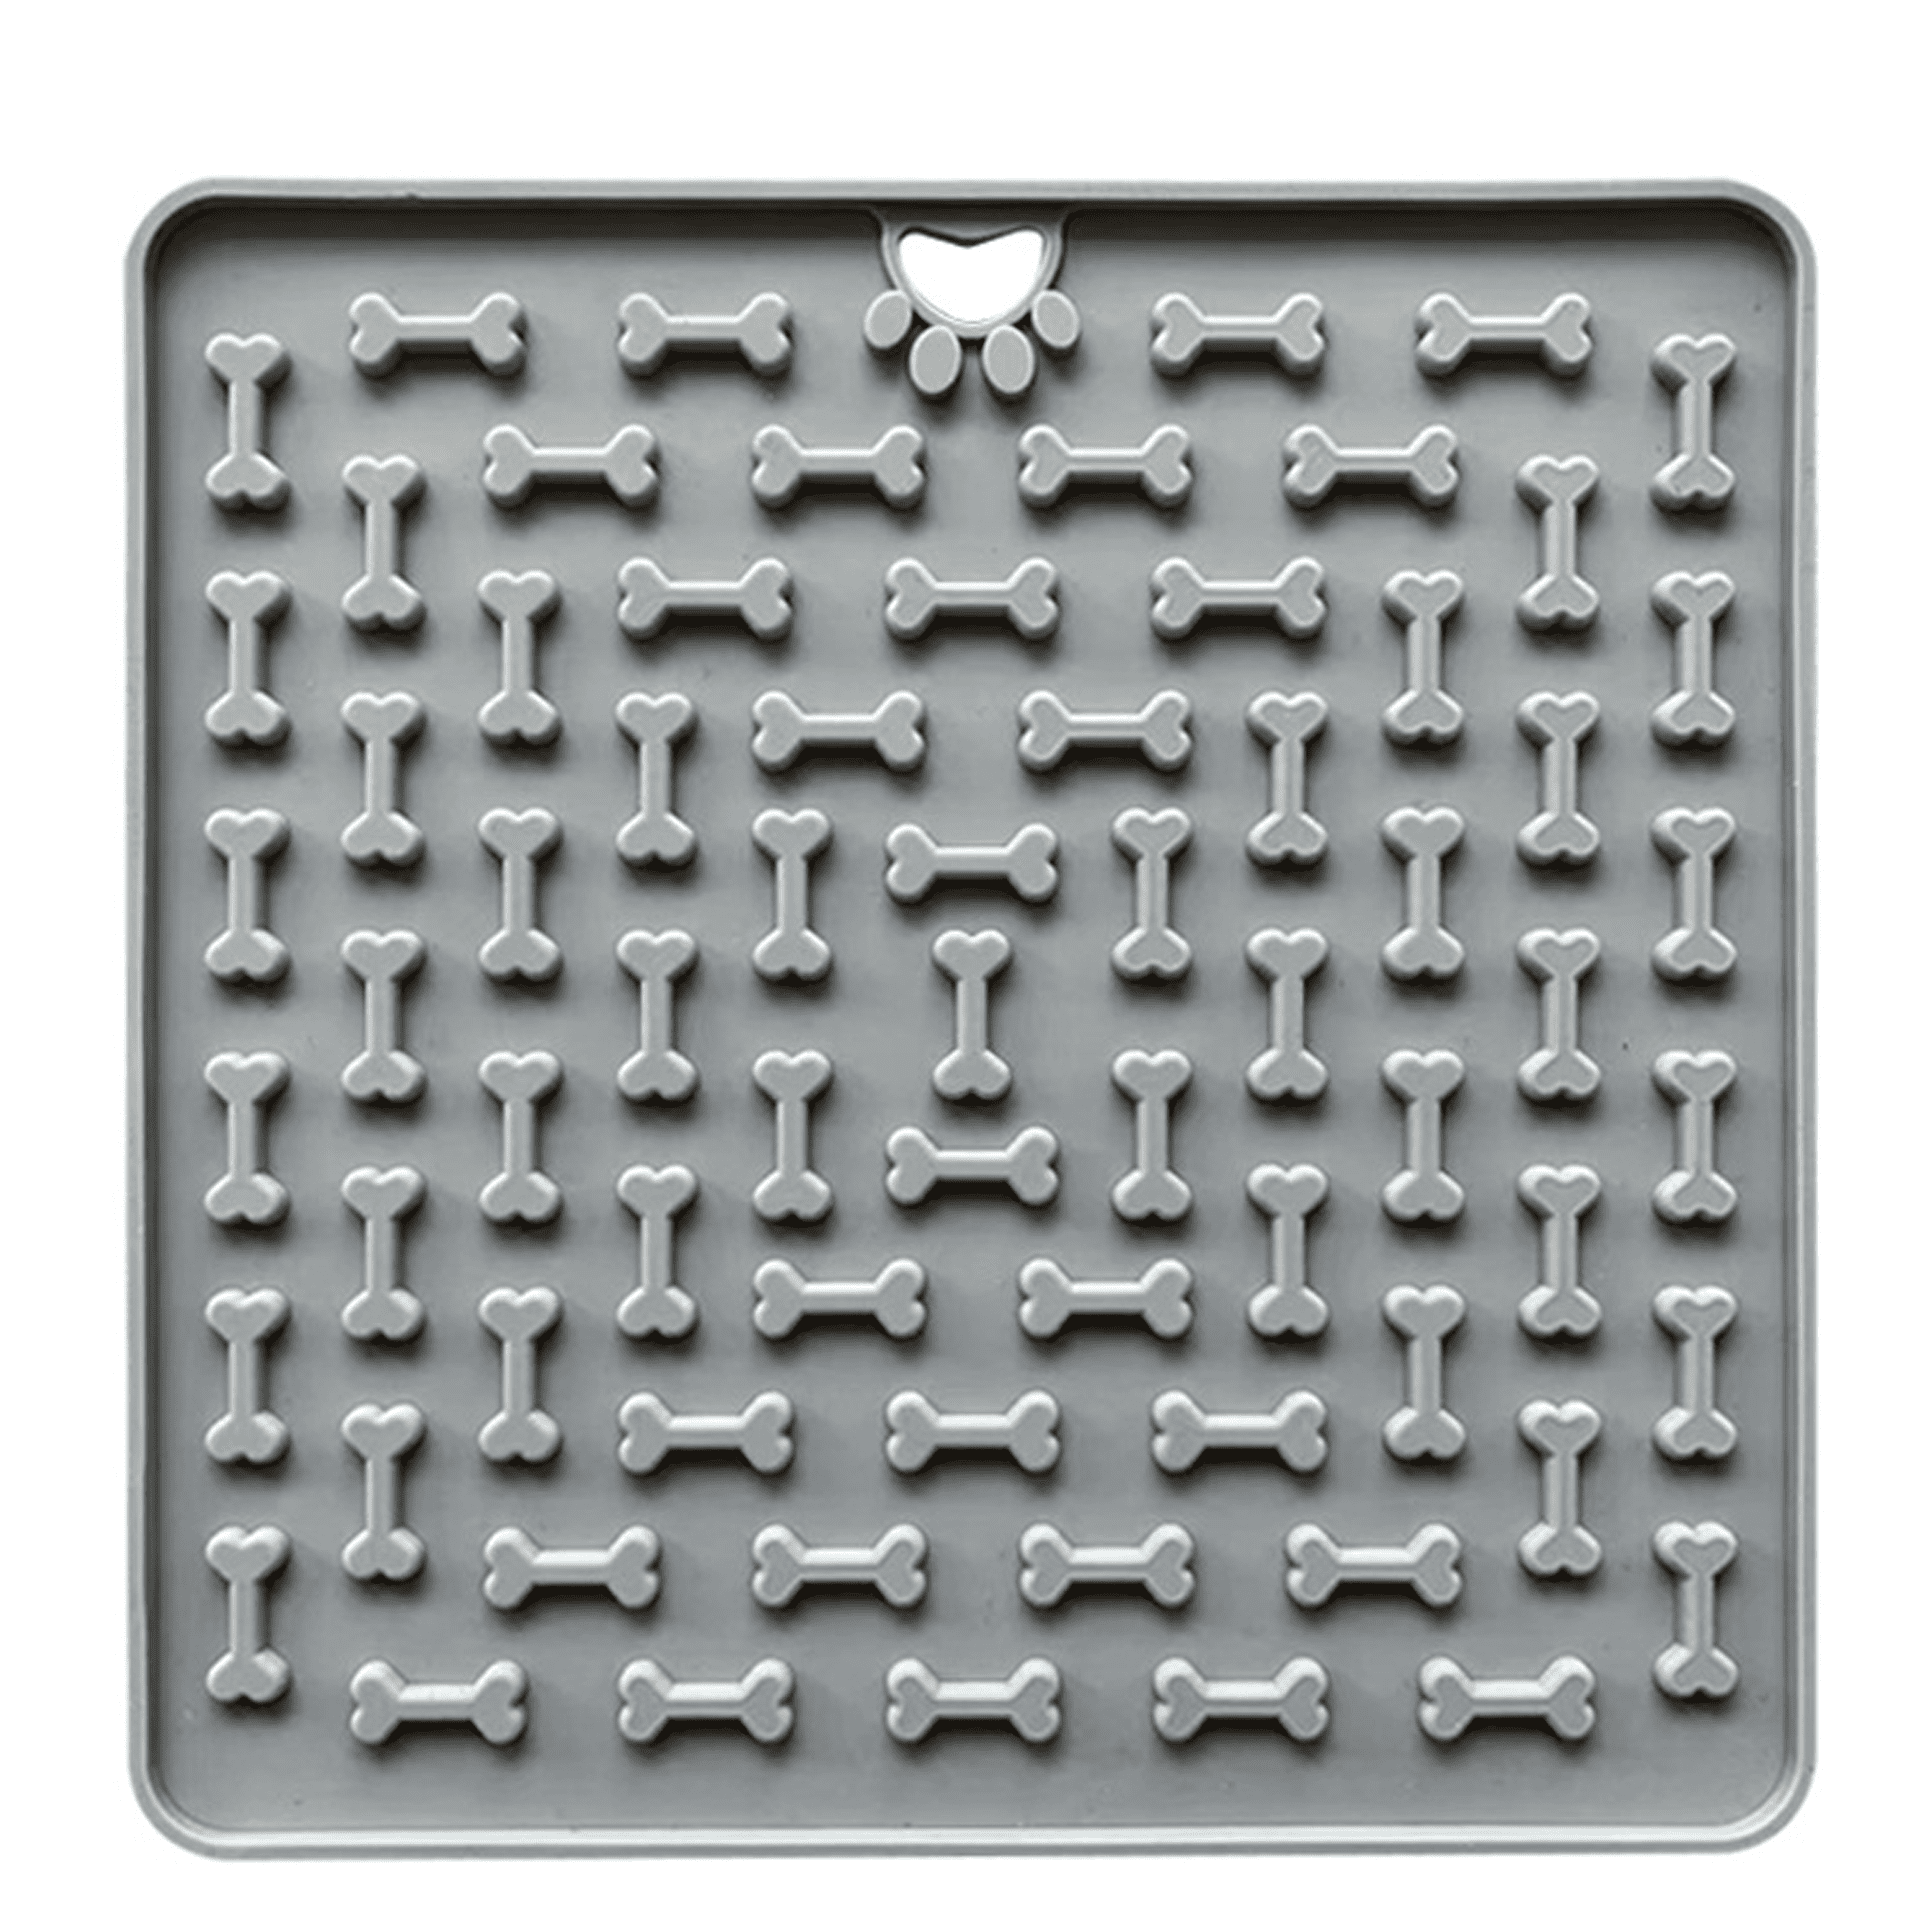 Avont Lick Mat for Dogs Cats, Dog Cat Lick Mat Slow Feeder for Wet Food,  Peanut Butter Lick Pad, Soothing Calming Licking Mat for Crate Training  Grooming 1-Grey